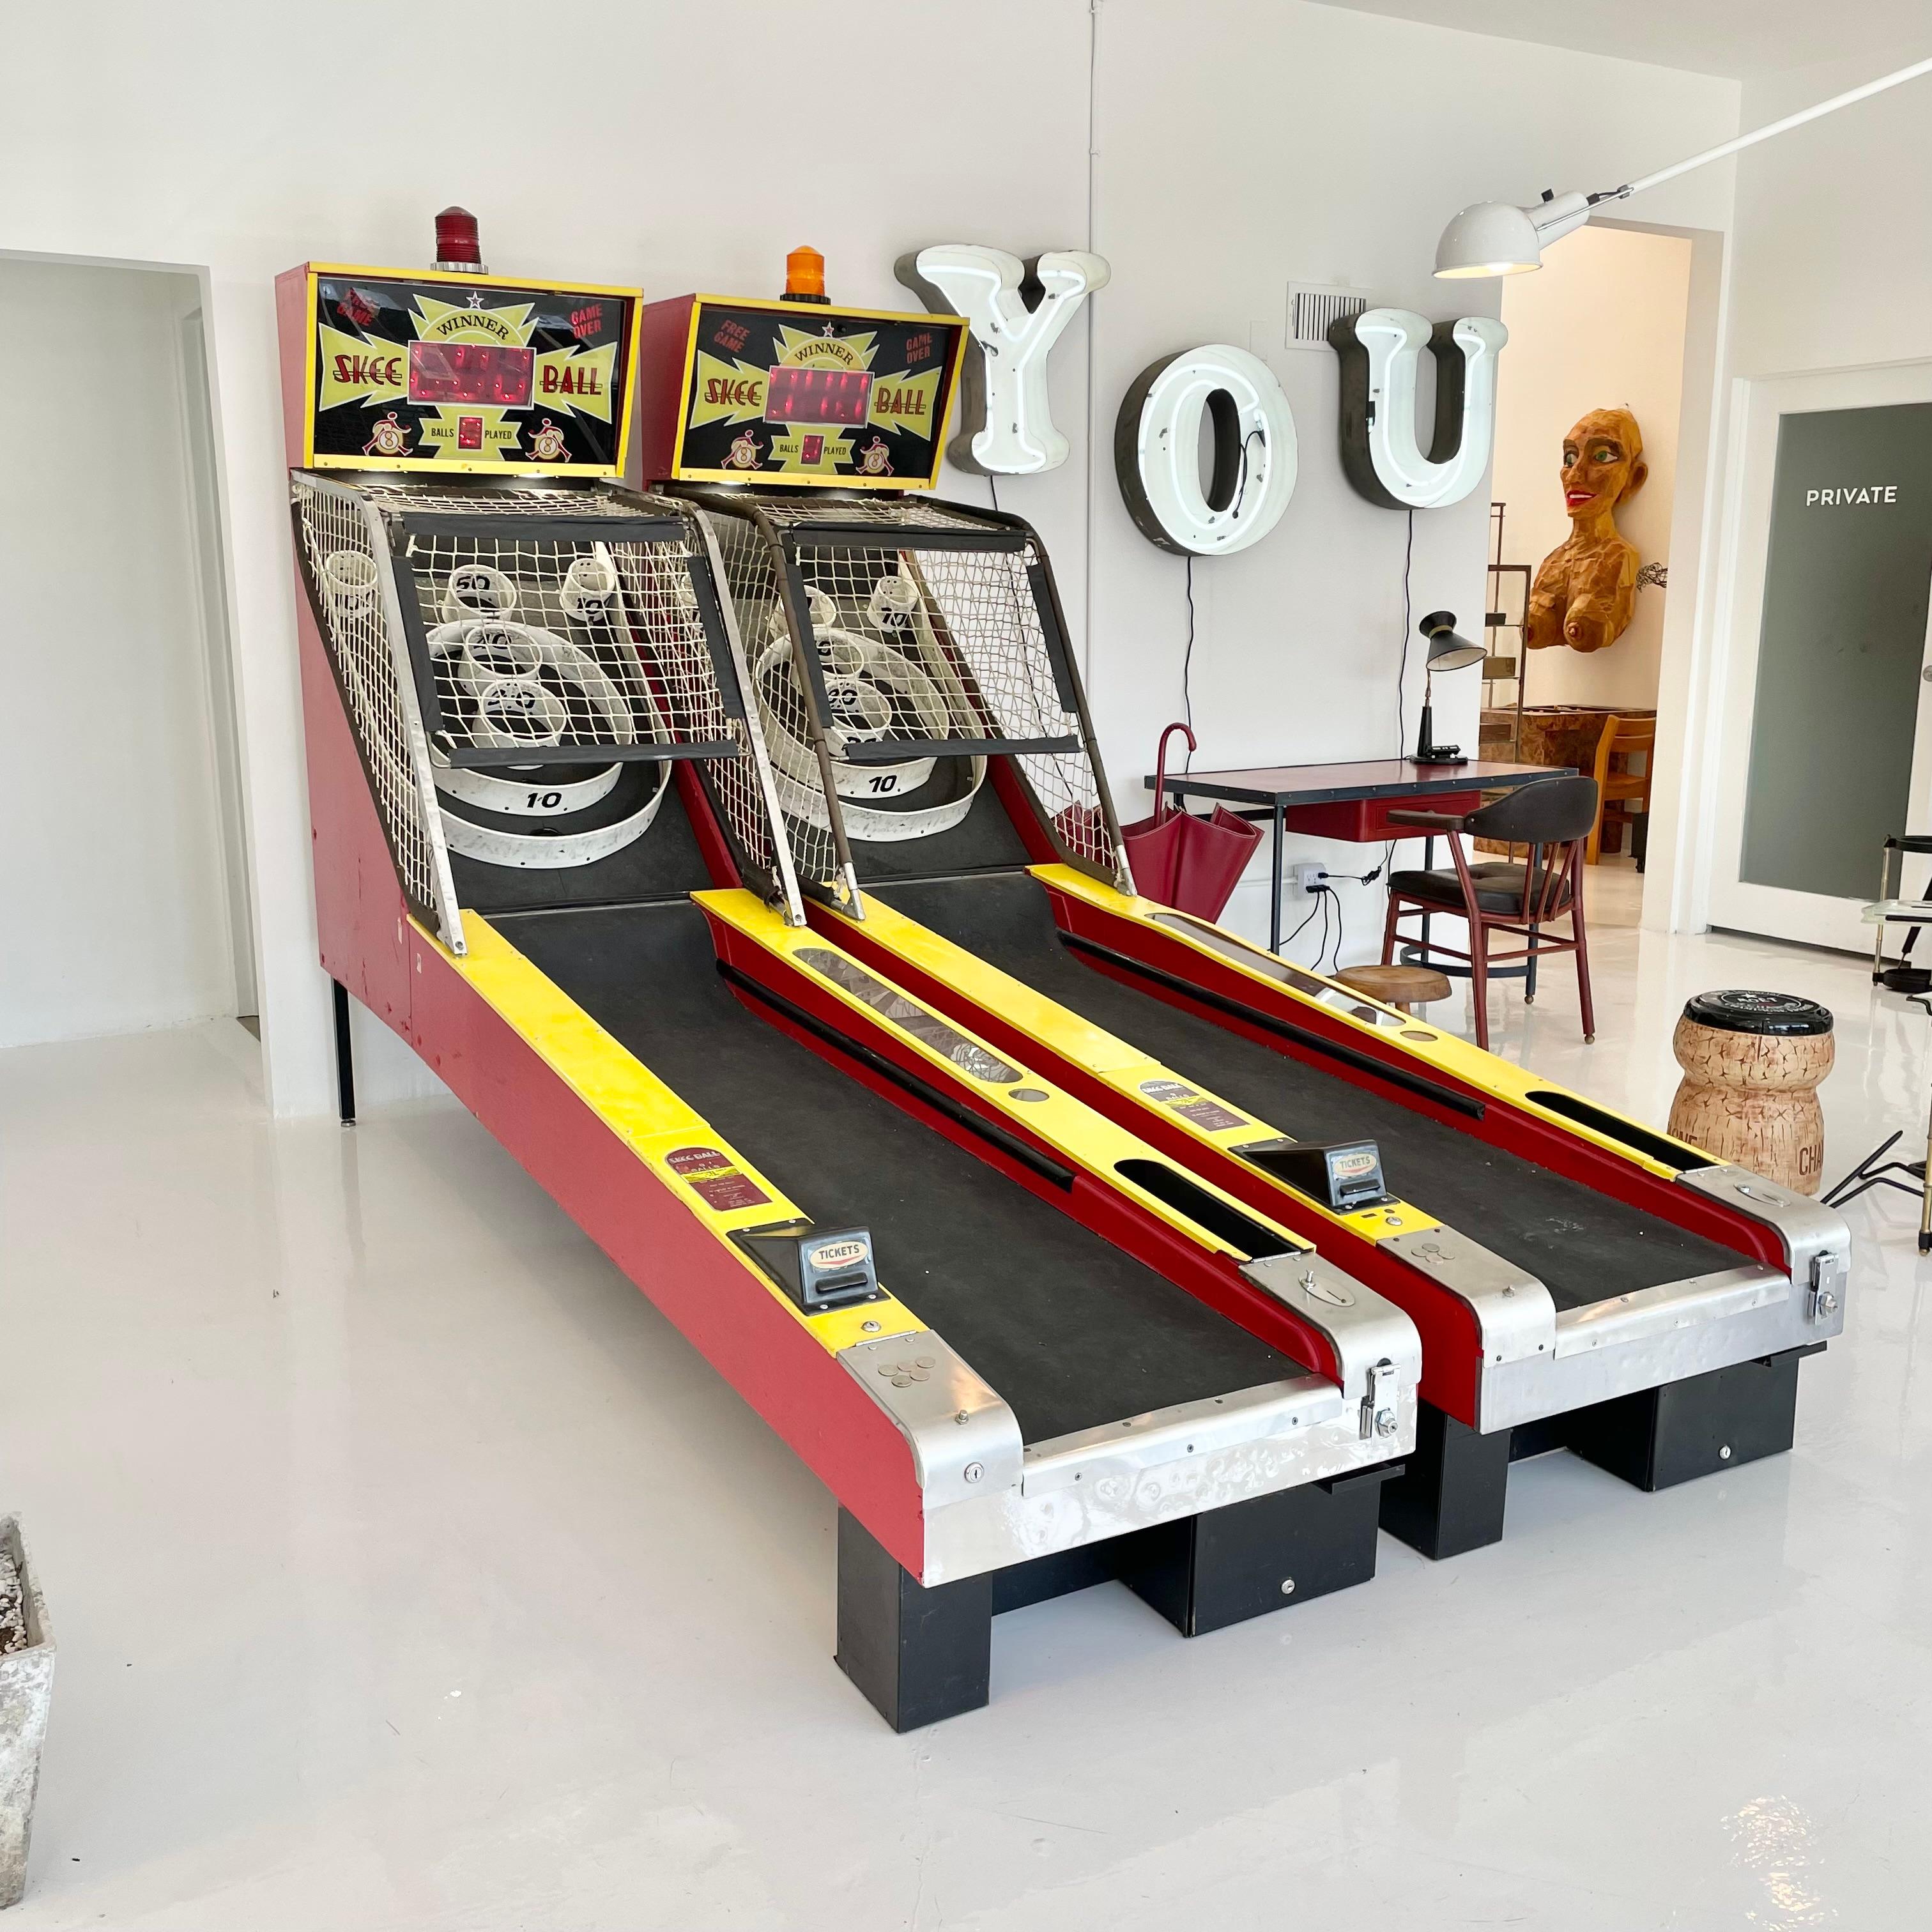 used skee ball machine for sale near me